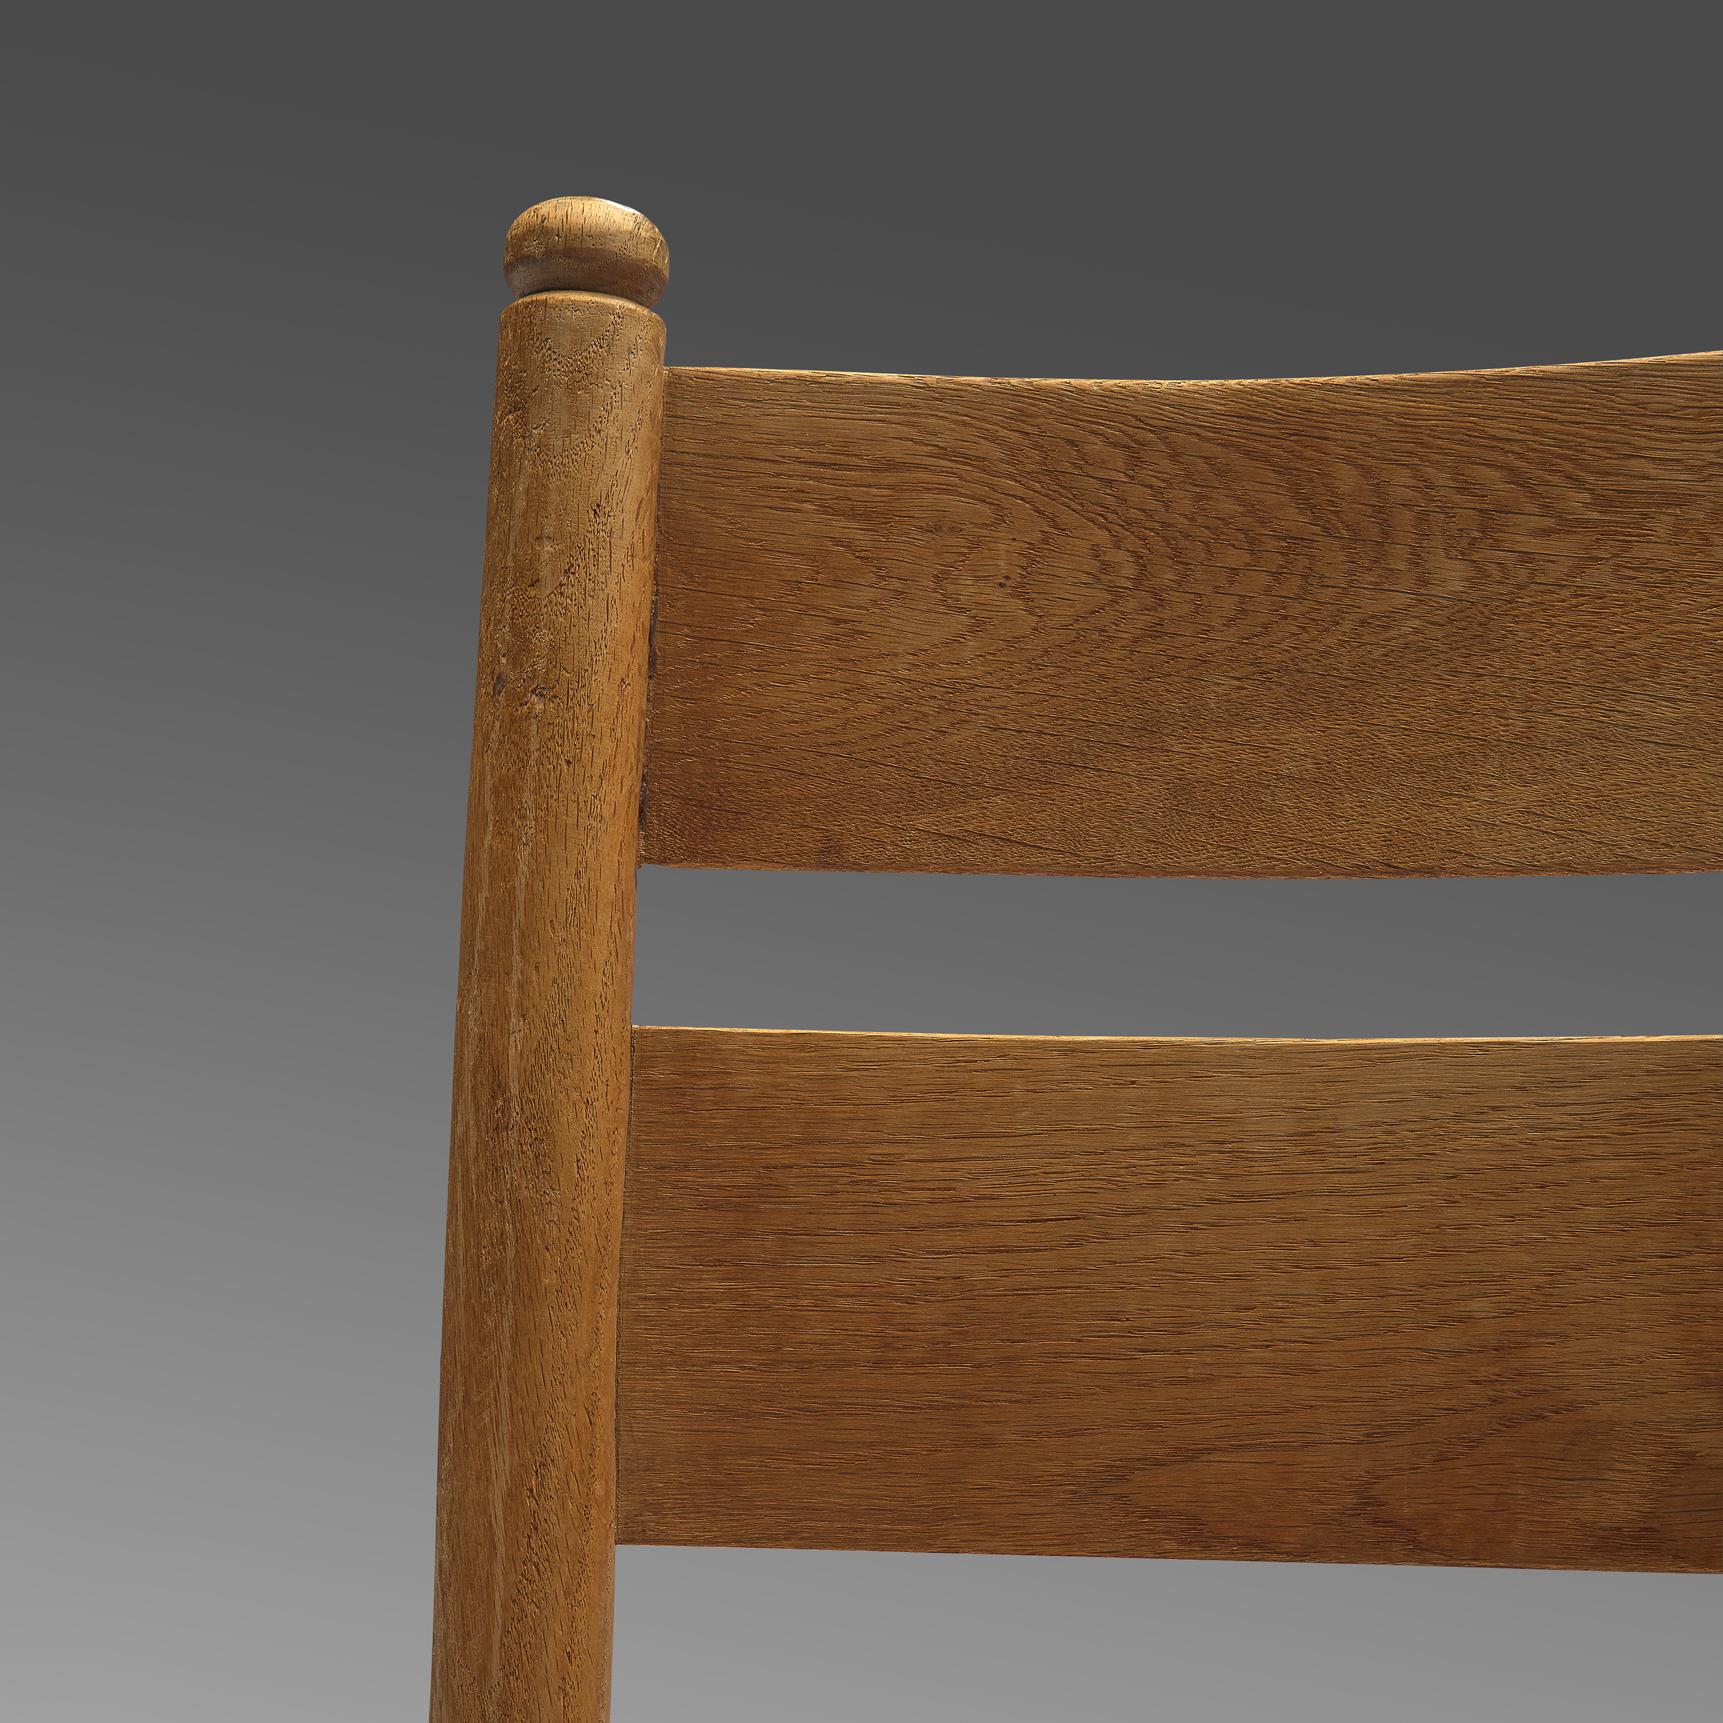 Rustic Danish Chairs in Straw and Oak For Sale 3